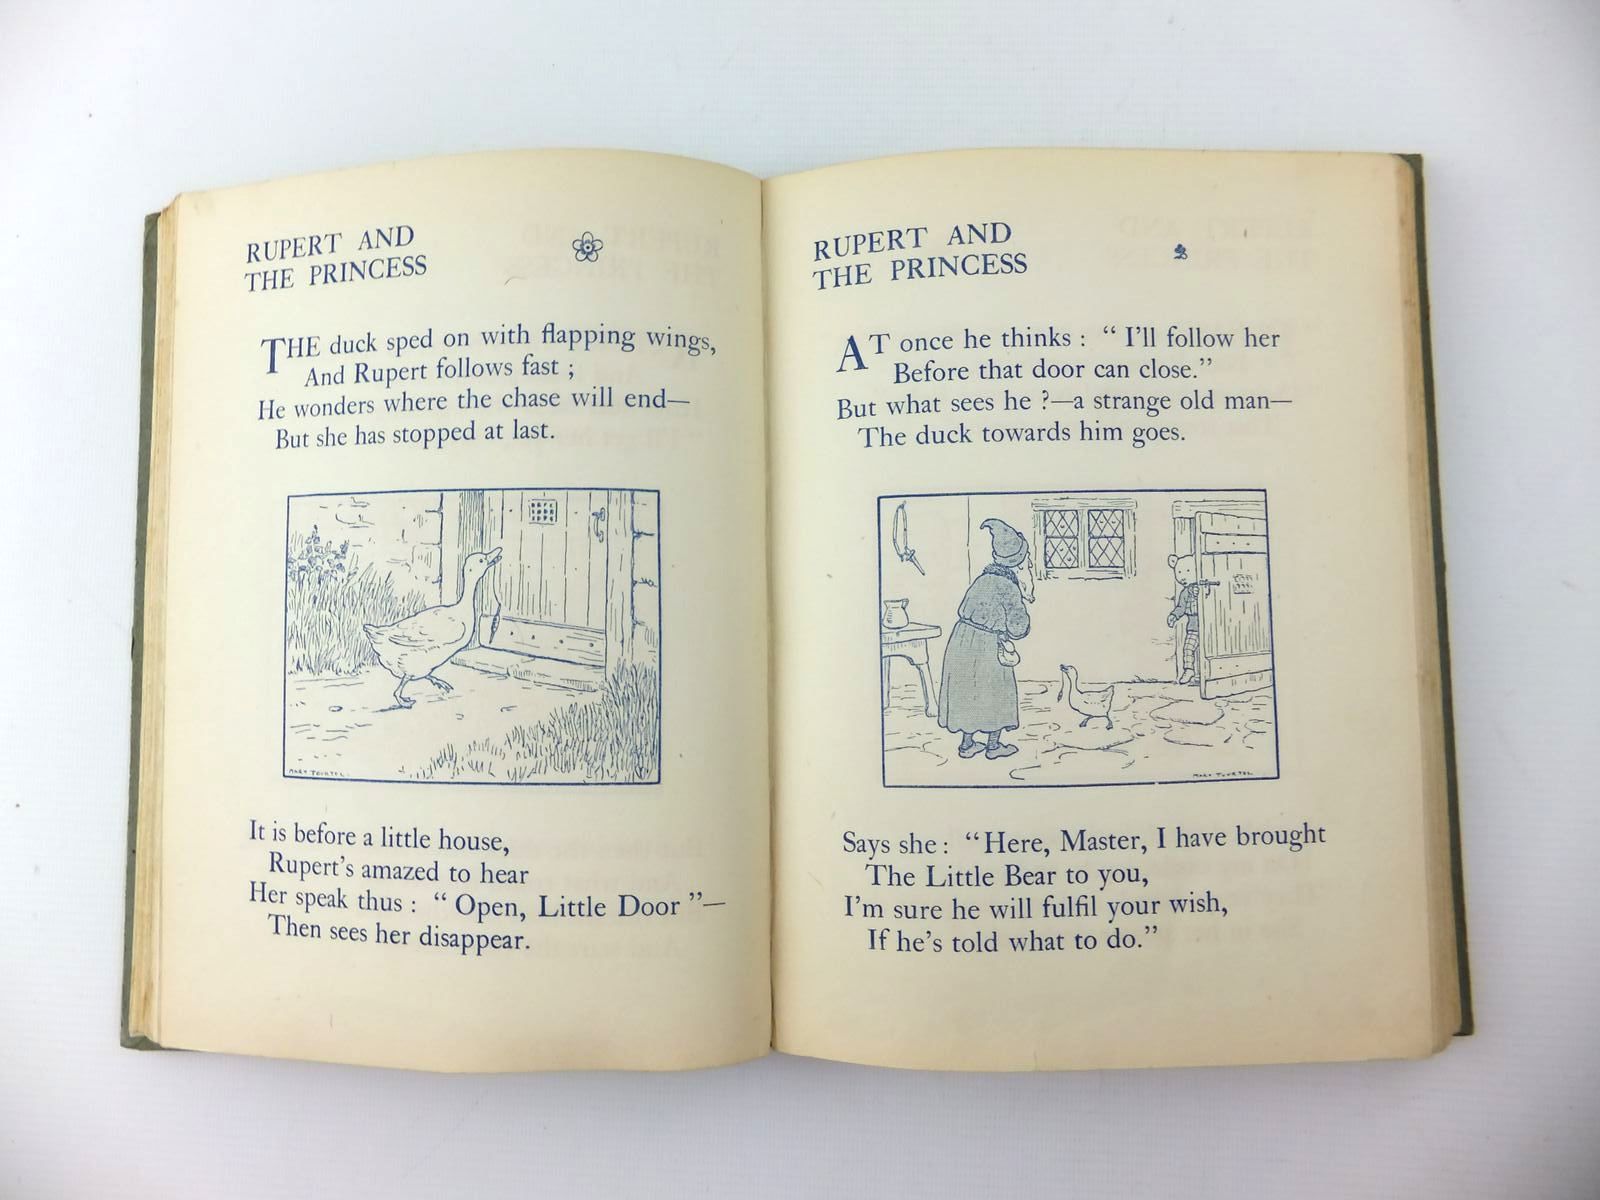 Photo of RUPERT LITTLE BEAR'S ADVENTURES NUMBER ONE written by Tourtel, Mary illustrated by Tourtel, Mary published by Sampson Low, Marston & Co. Ltd. (STOCK CODE: 1208720)  for sale by Stella & Rose's Books